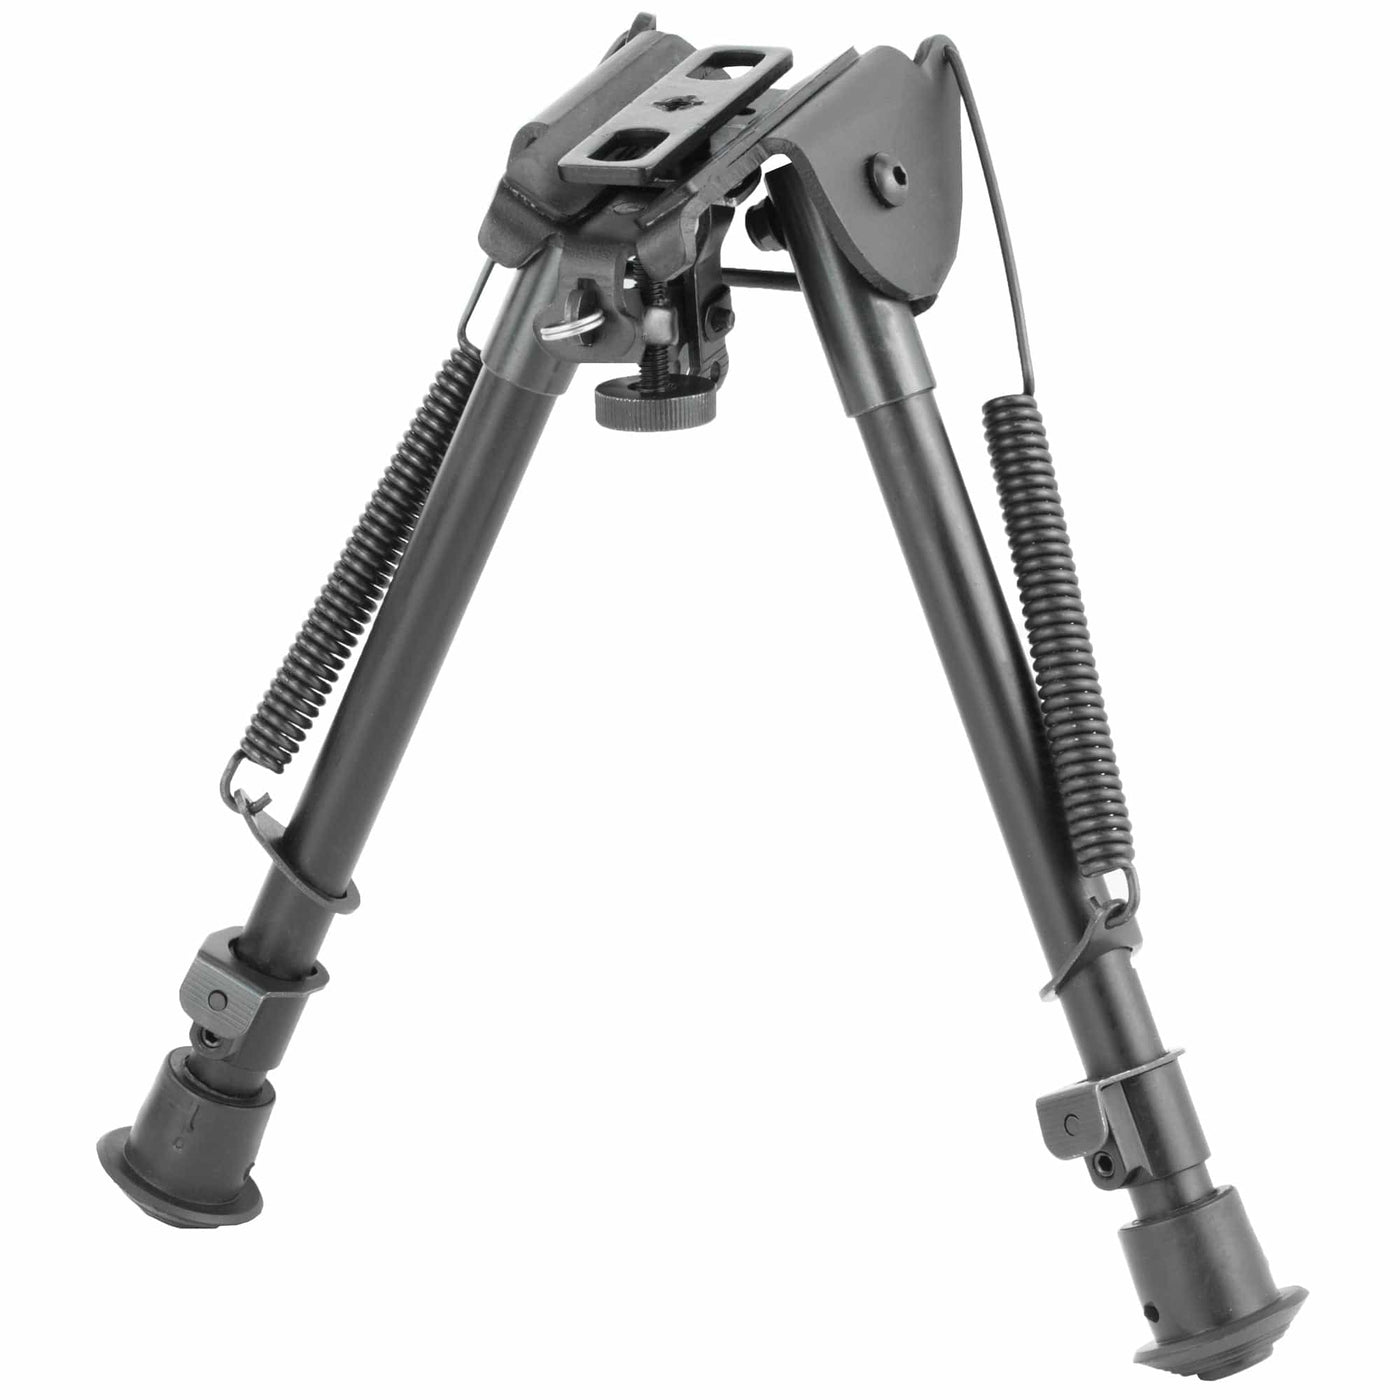 NCSTAR Ncstar Preci Grd Bipod Full Notched Grips/Pads/Stocks